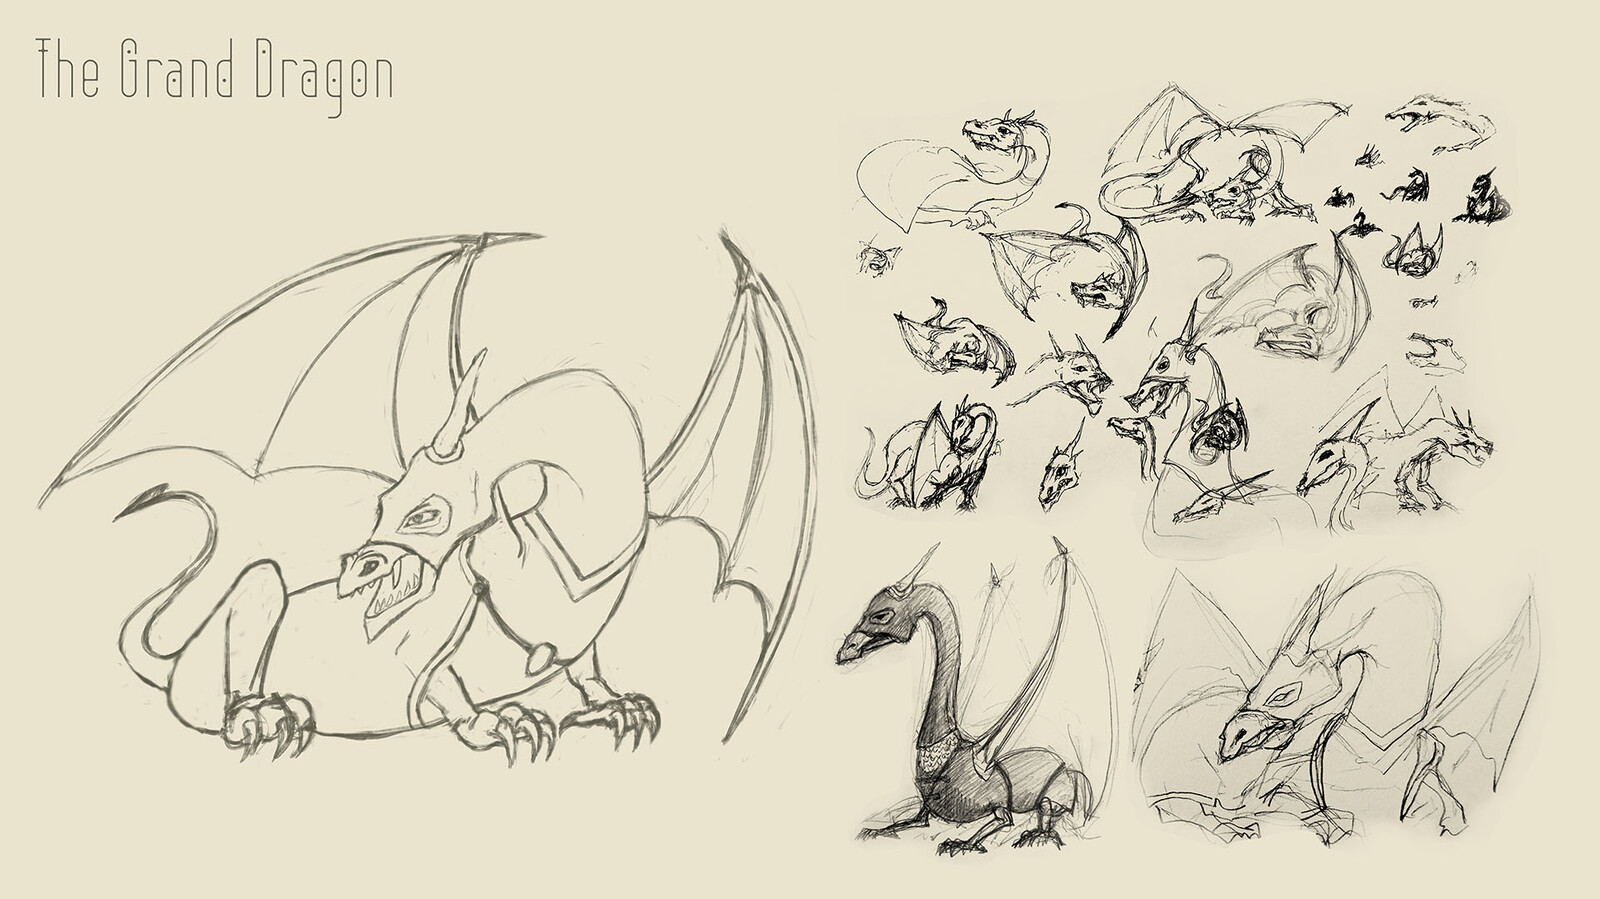 The Grand Dragon sketches and ideation.